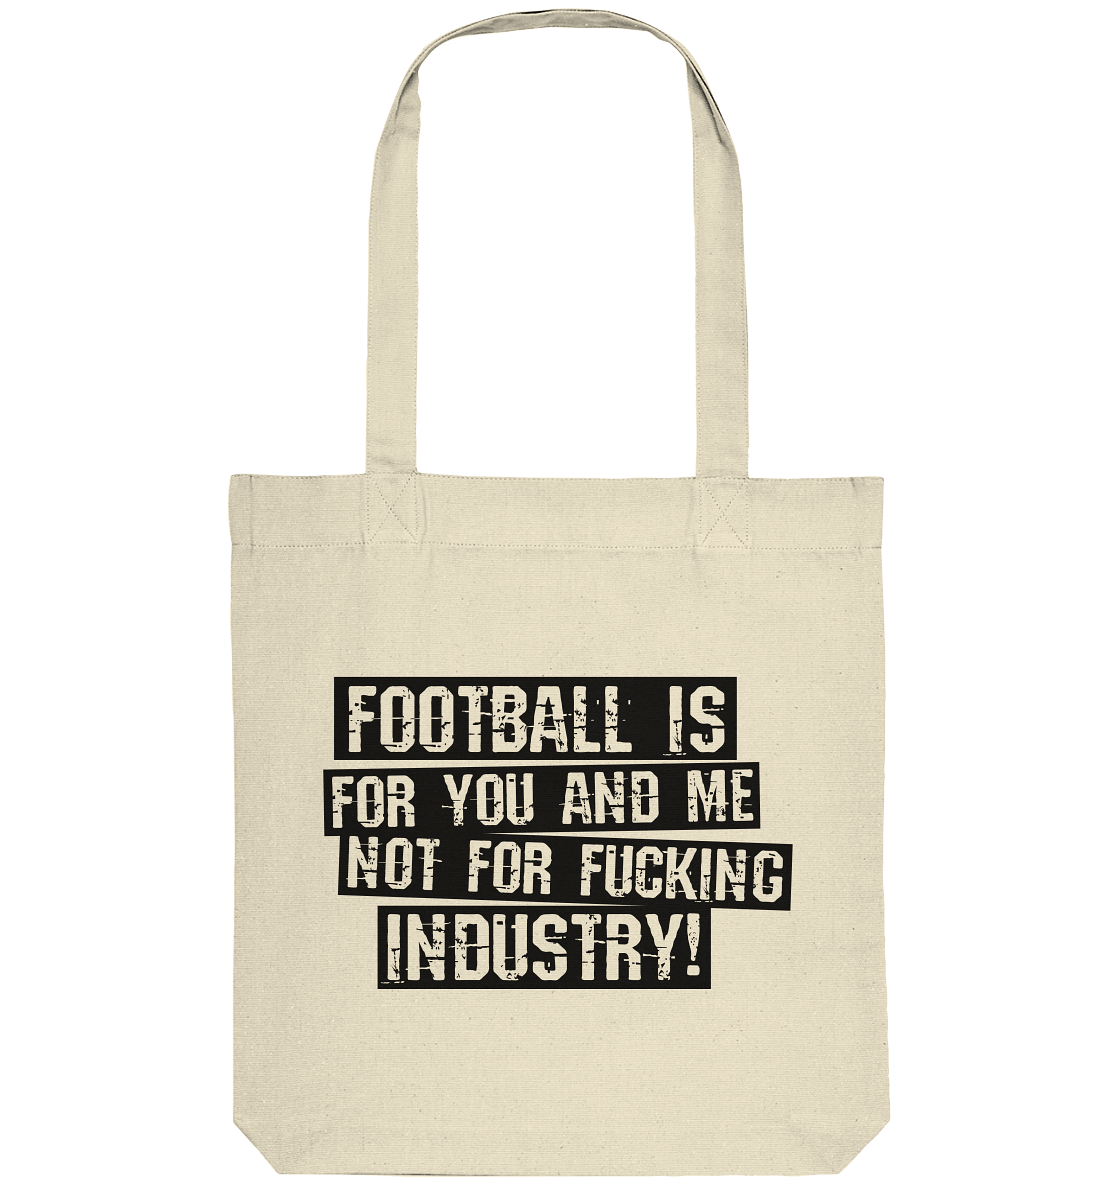 BLOCK.FC Shirt "FOOTBALL IS FOR YOU AND ME NOT FOR FUCKING INDUSTRY!" Organic Baumwolltasche natural